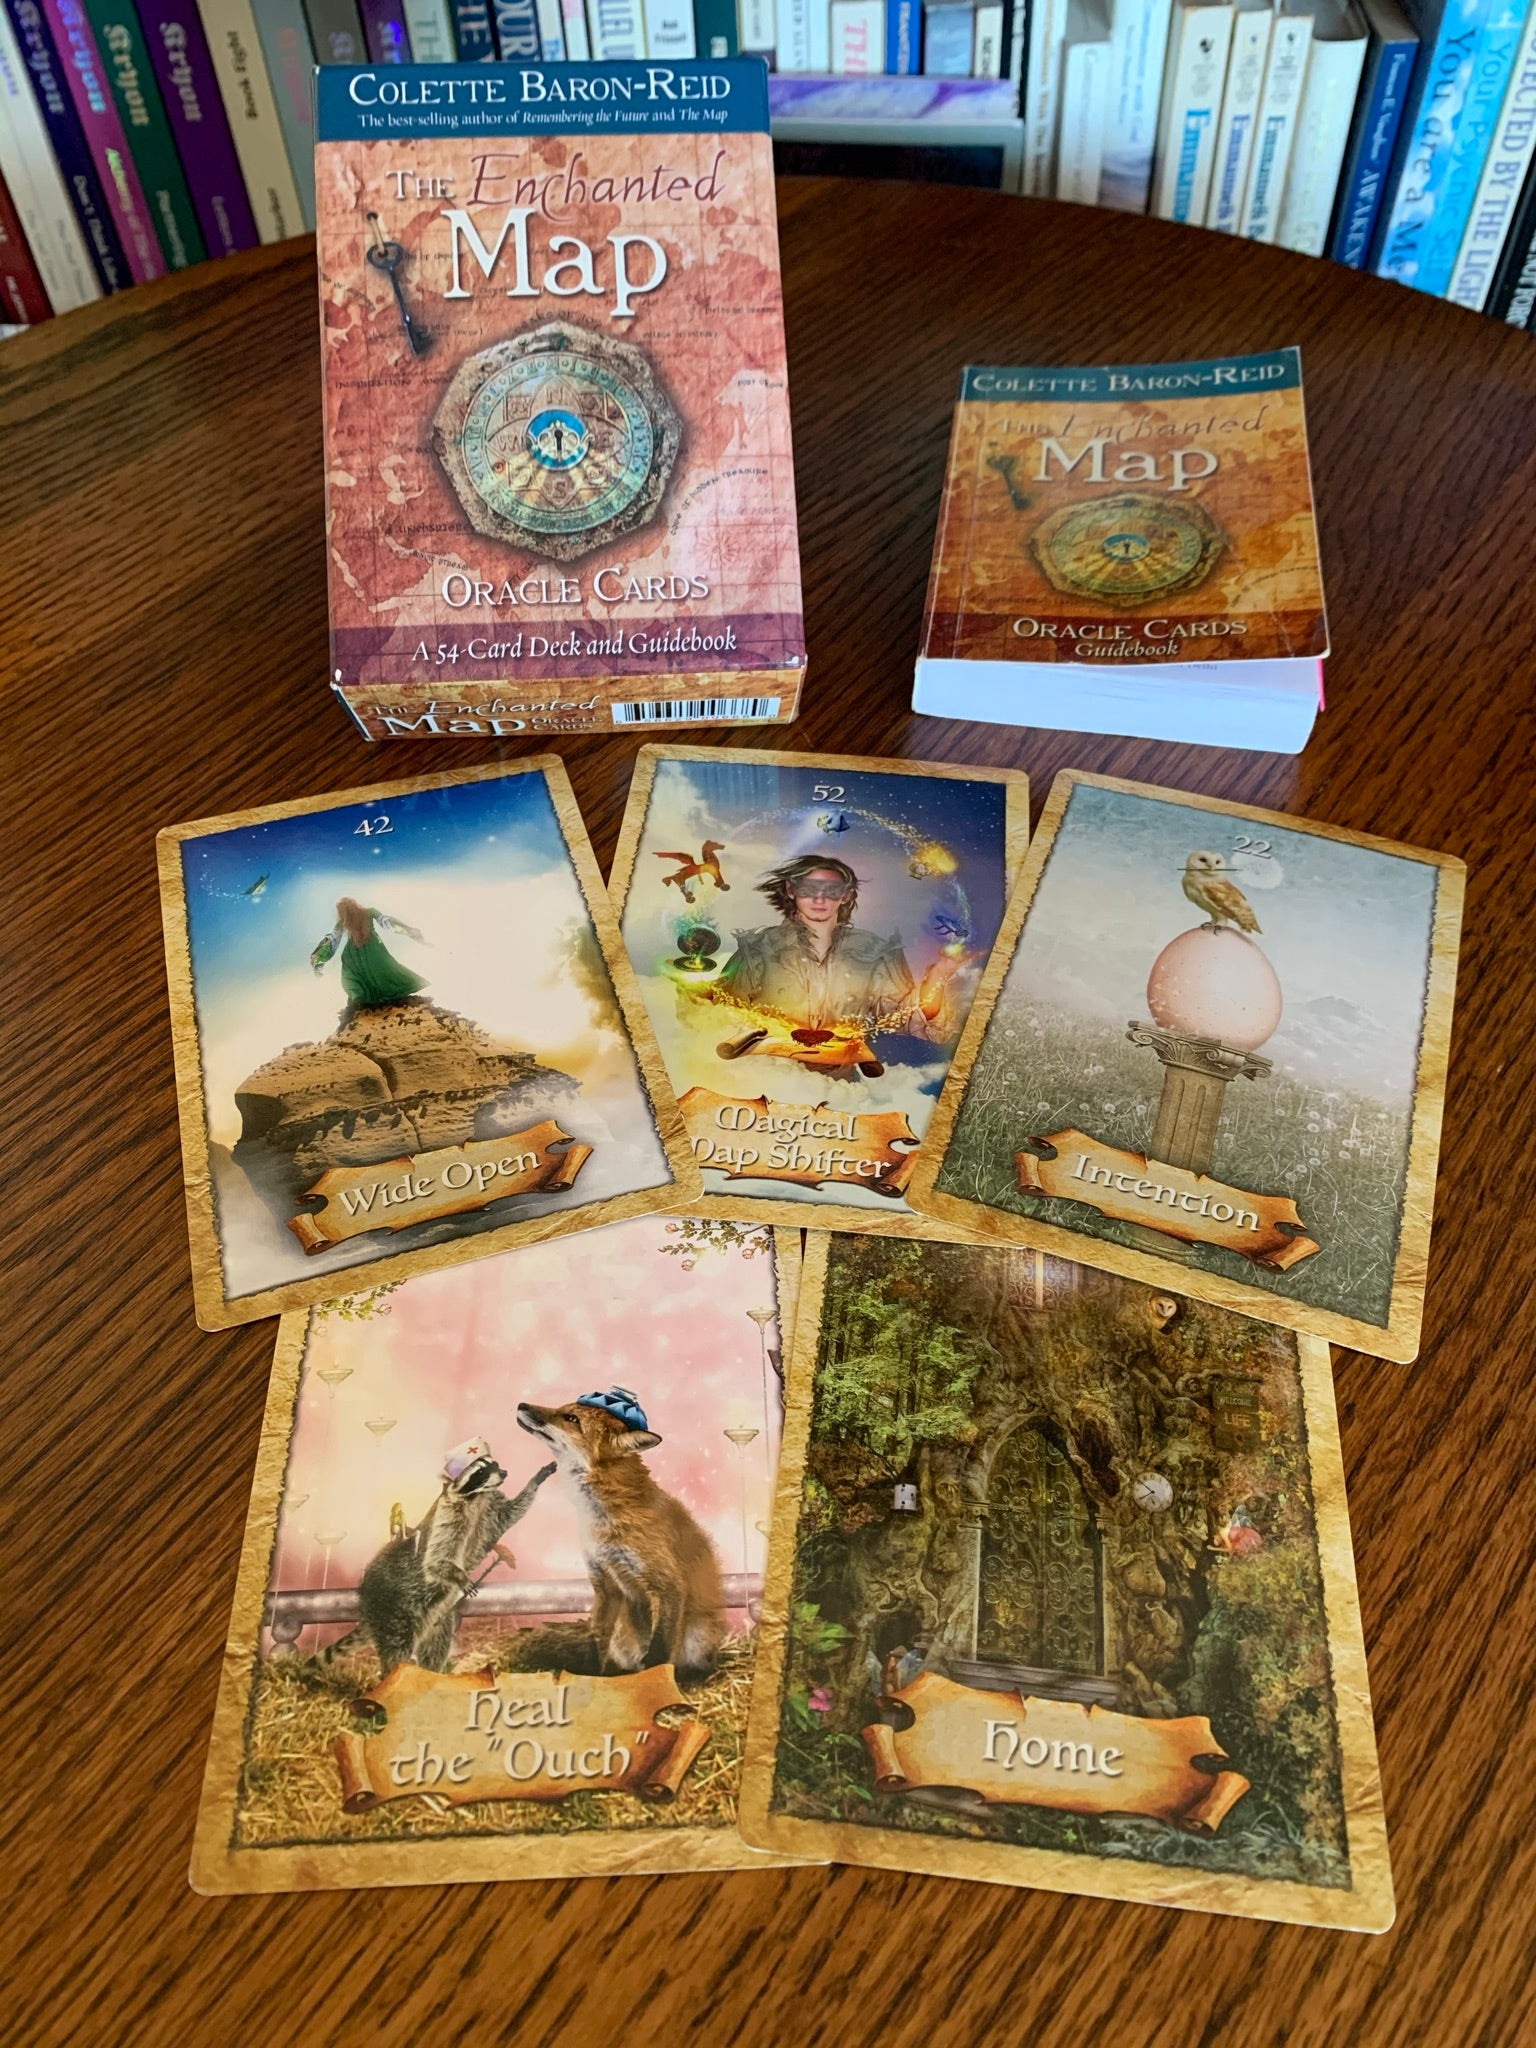 The Enchanted Map Oracle Cards by Colette Baron Reid, includes 54 cards, a guidebook and an box for storing them. An enchanting deck with lovely artwork. Another one of my favorite decks, it gives you the tough answers (e.g. "rock bottom" & "Ghostlands") which are necessary for self-growth and understanding, as well as uplifting messages (e.g. "Coming to Life" & "Peaks of Joy."). Colette Baron-Reid is a psychic medium, intuitive counselor and best-selling author. Price is $21.99.